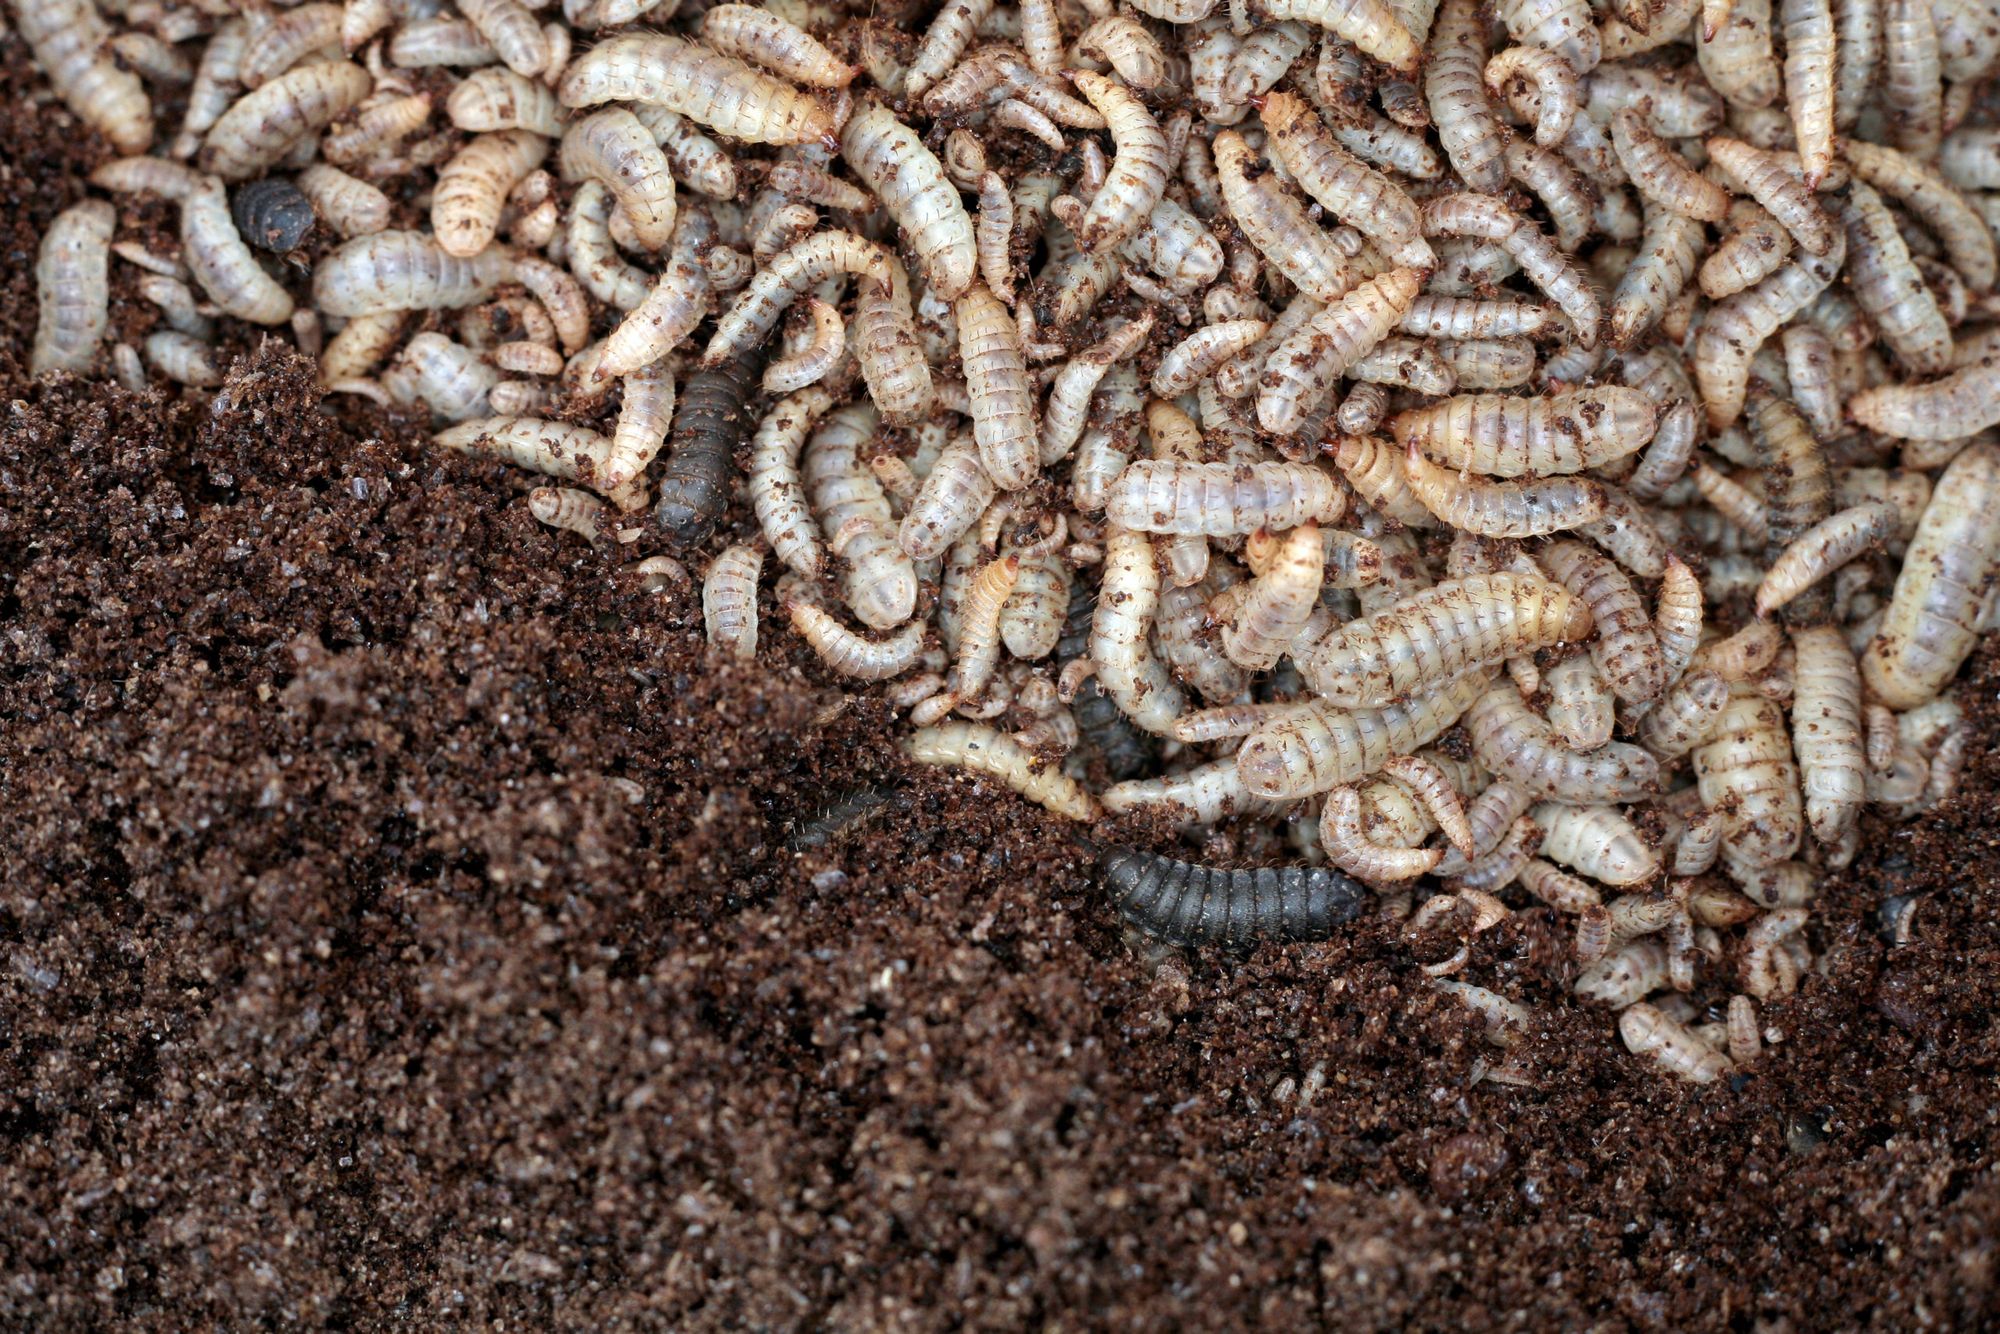 Build a Black Soldier Fly Larvae Farm | Community Chickens